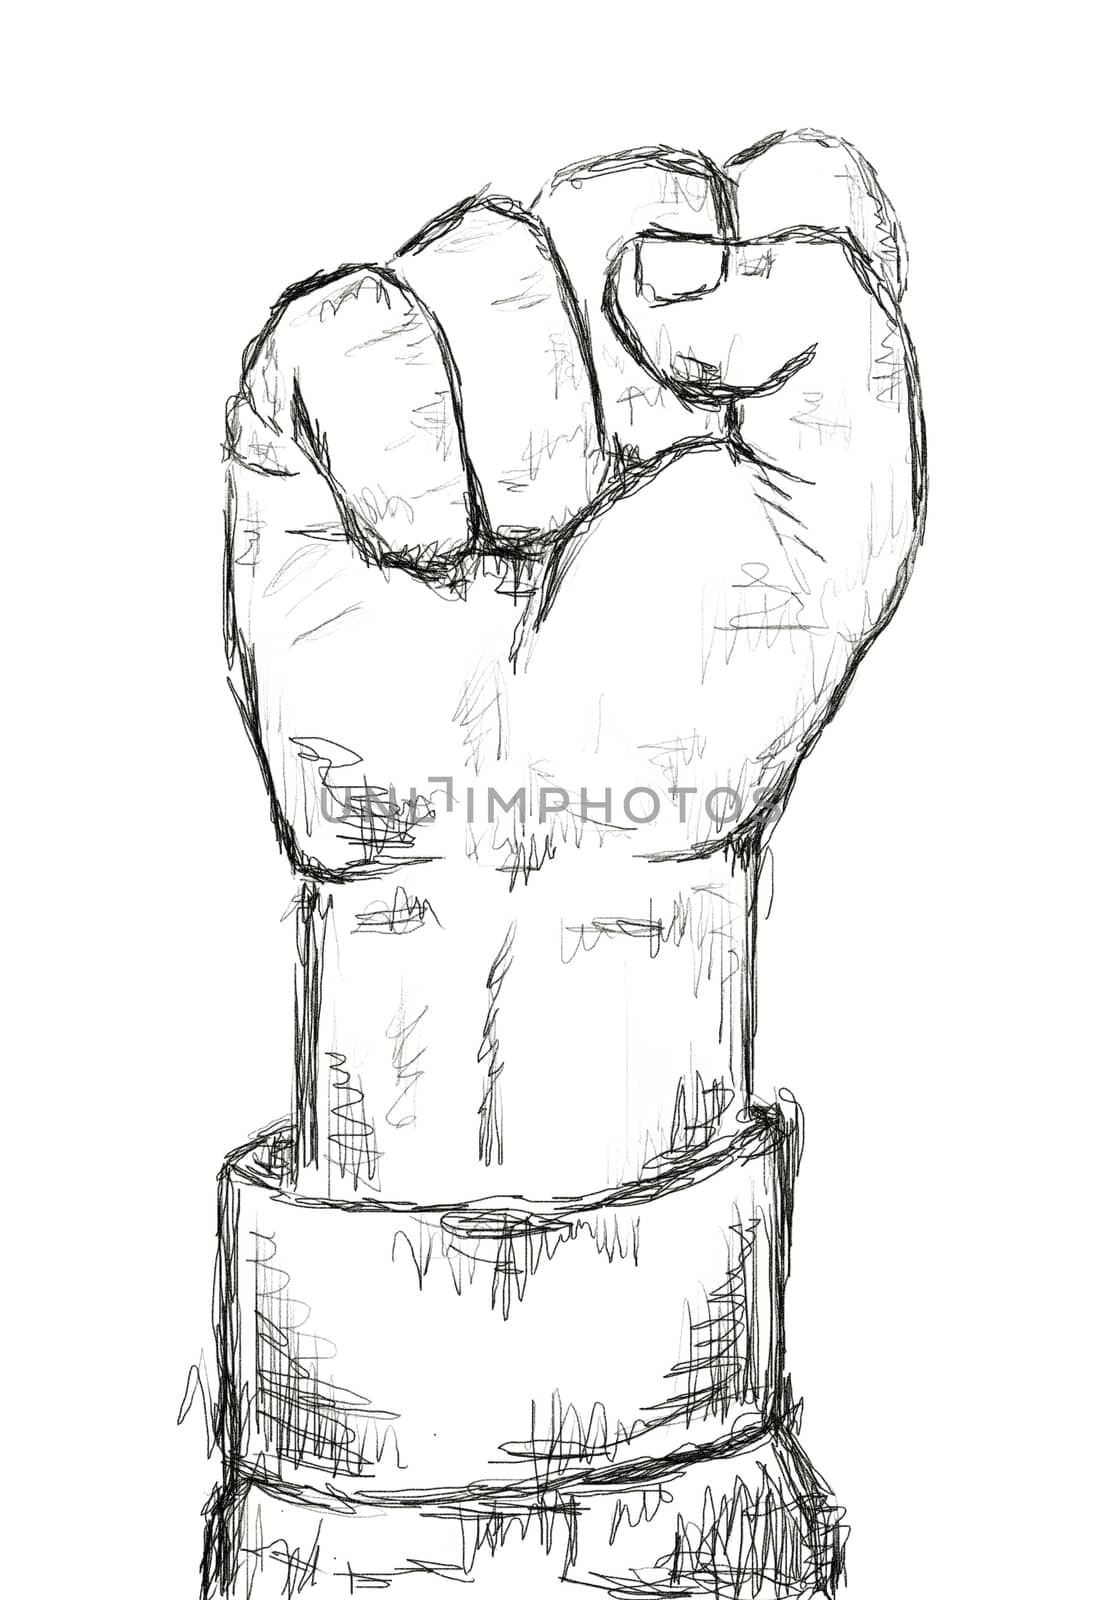 clenched fist held high in protest - sketch illustration